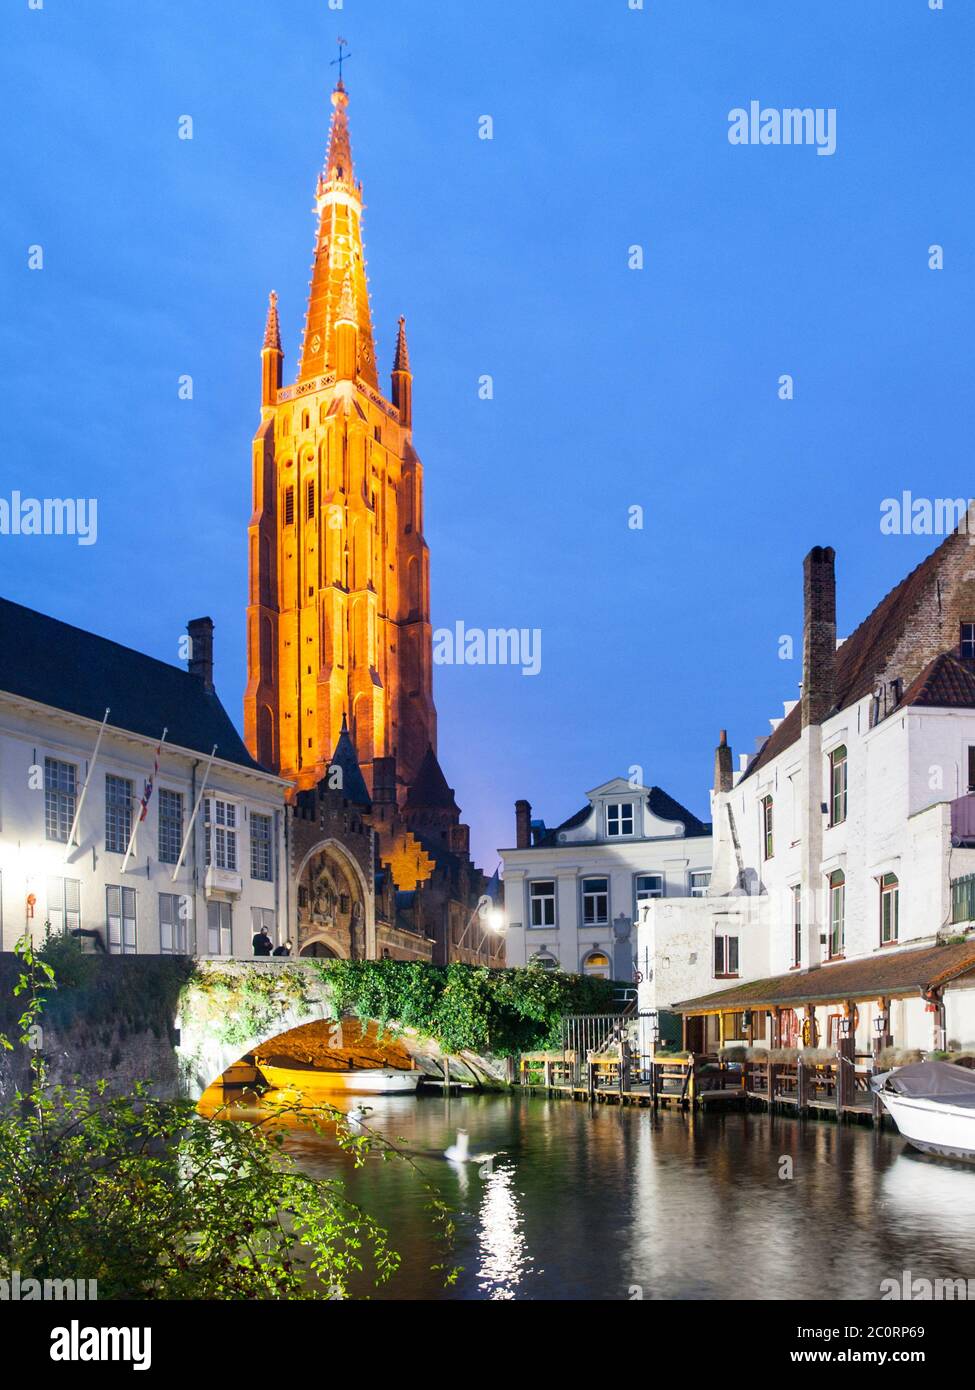 Church of Our Lady and bridge over water canal by night, Bruges, Belgium. Stock Photo